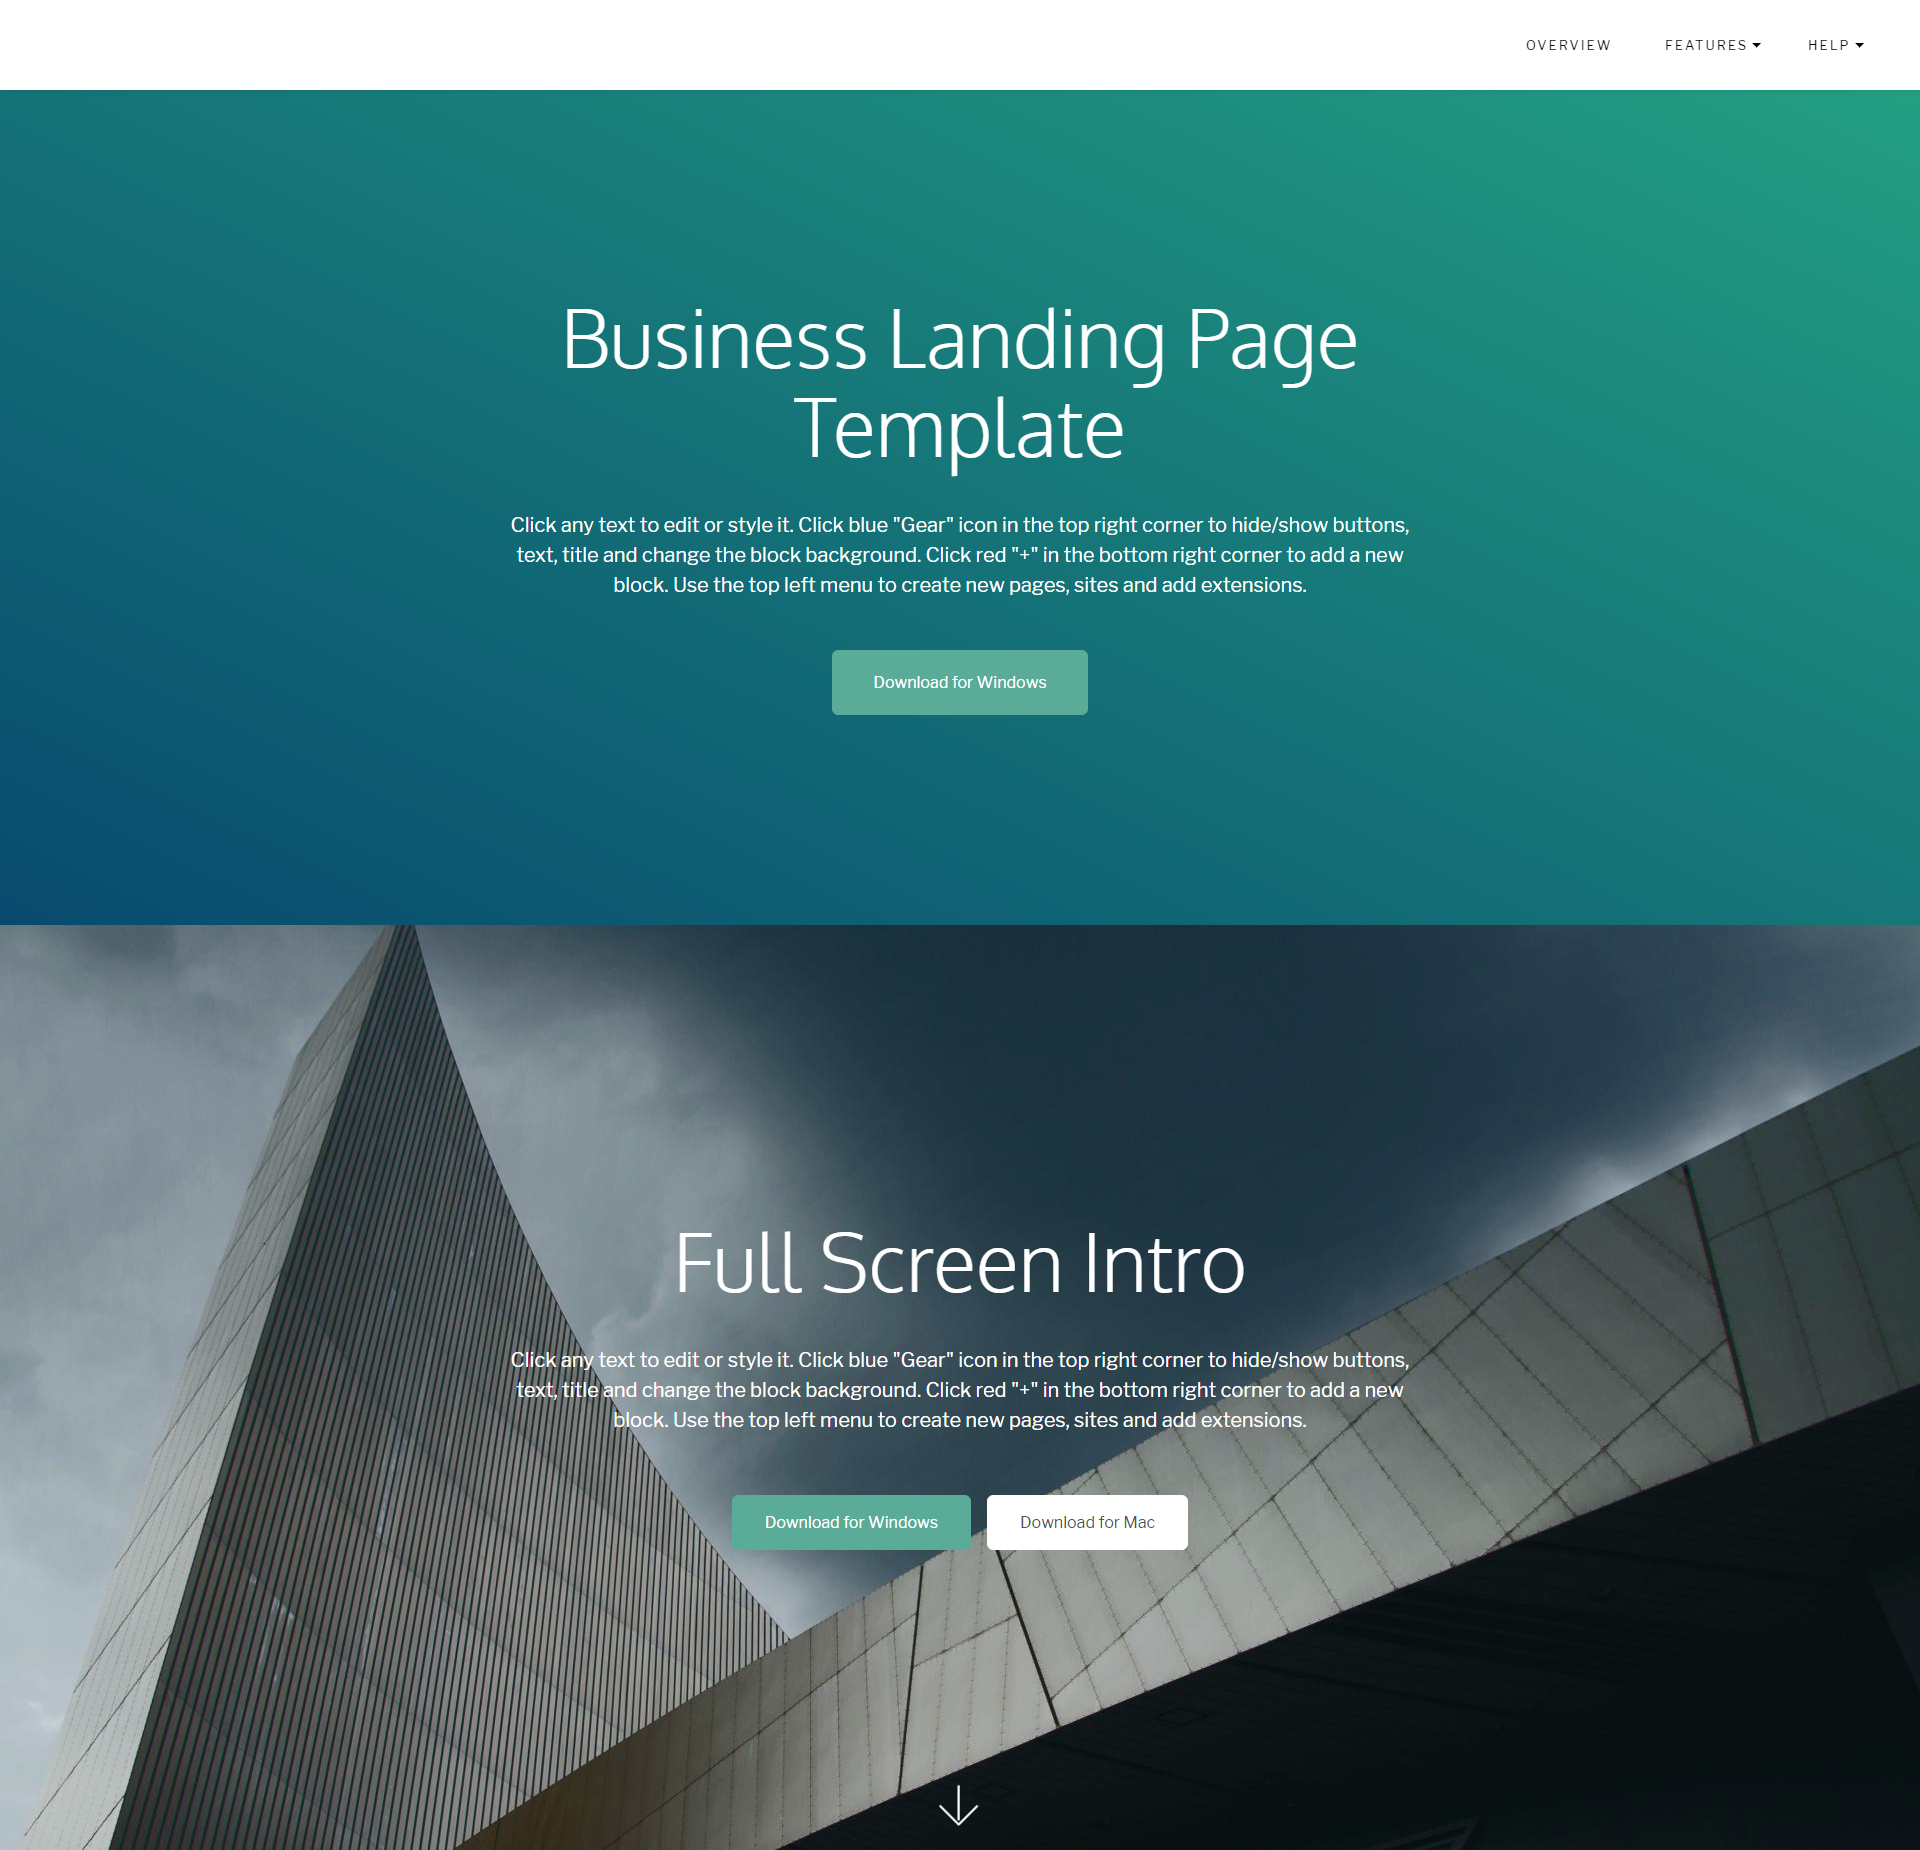 HTML5 Bootstrap Business Landing Page Templates